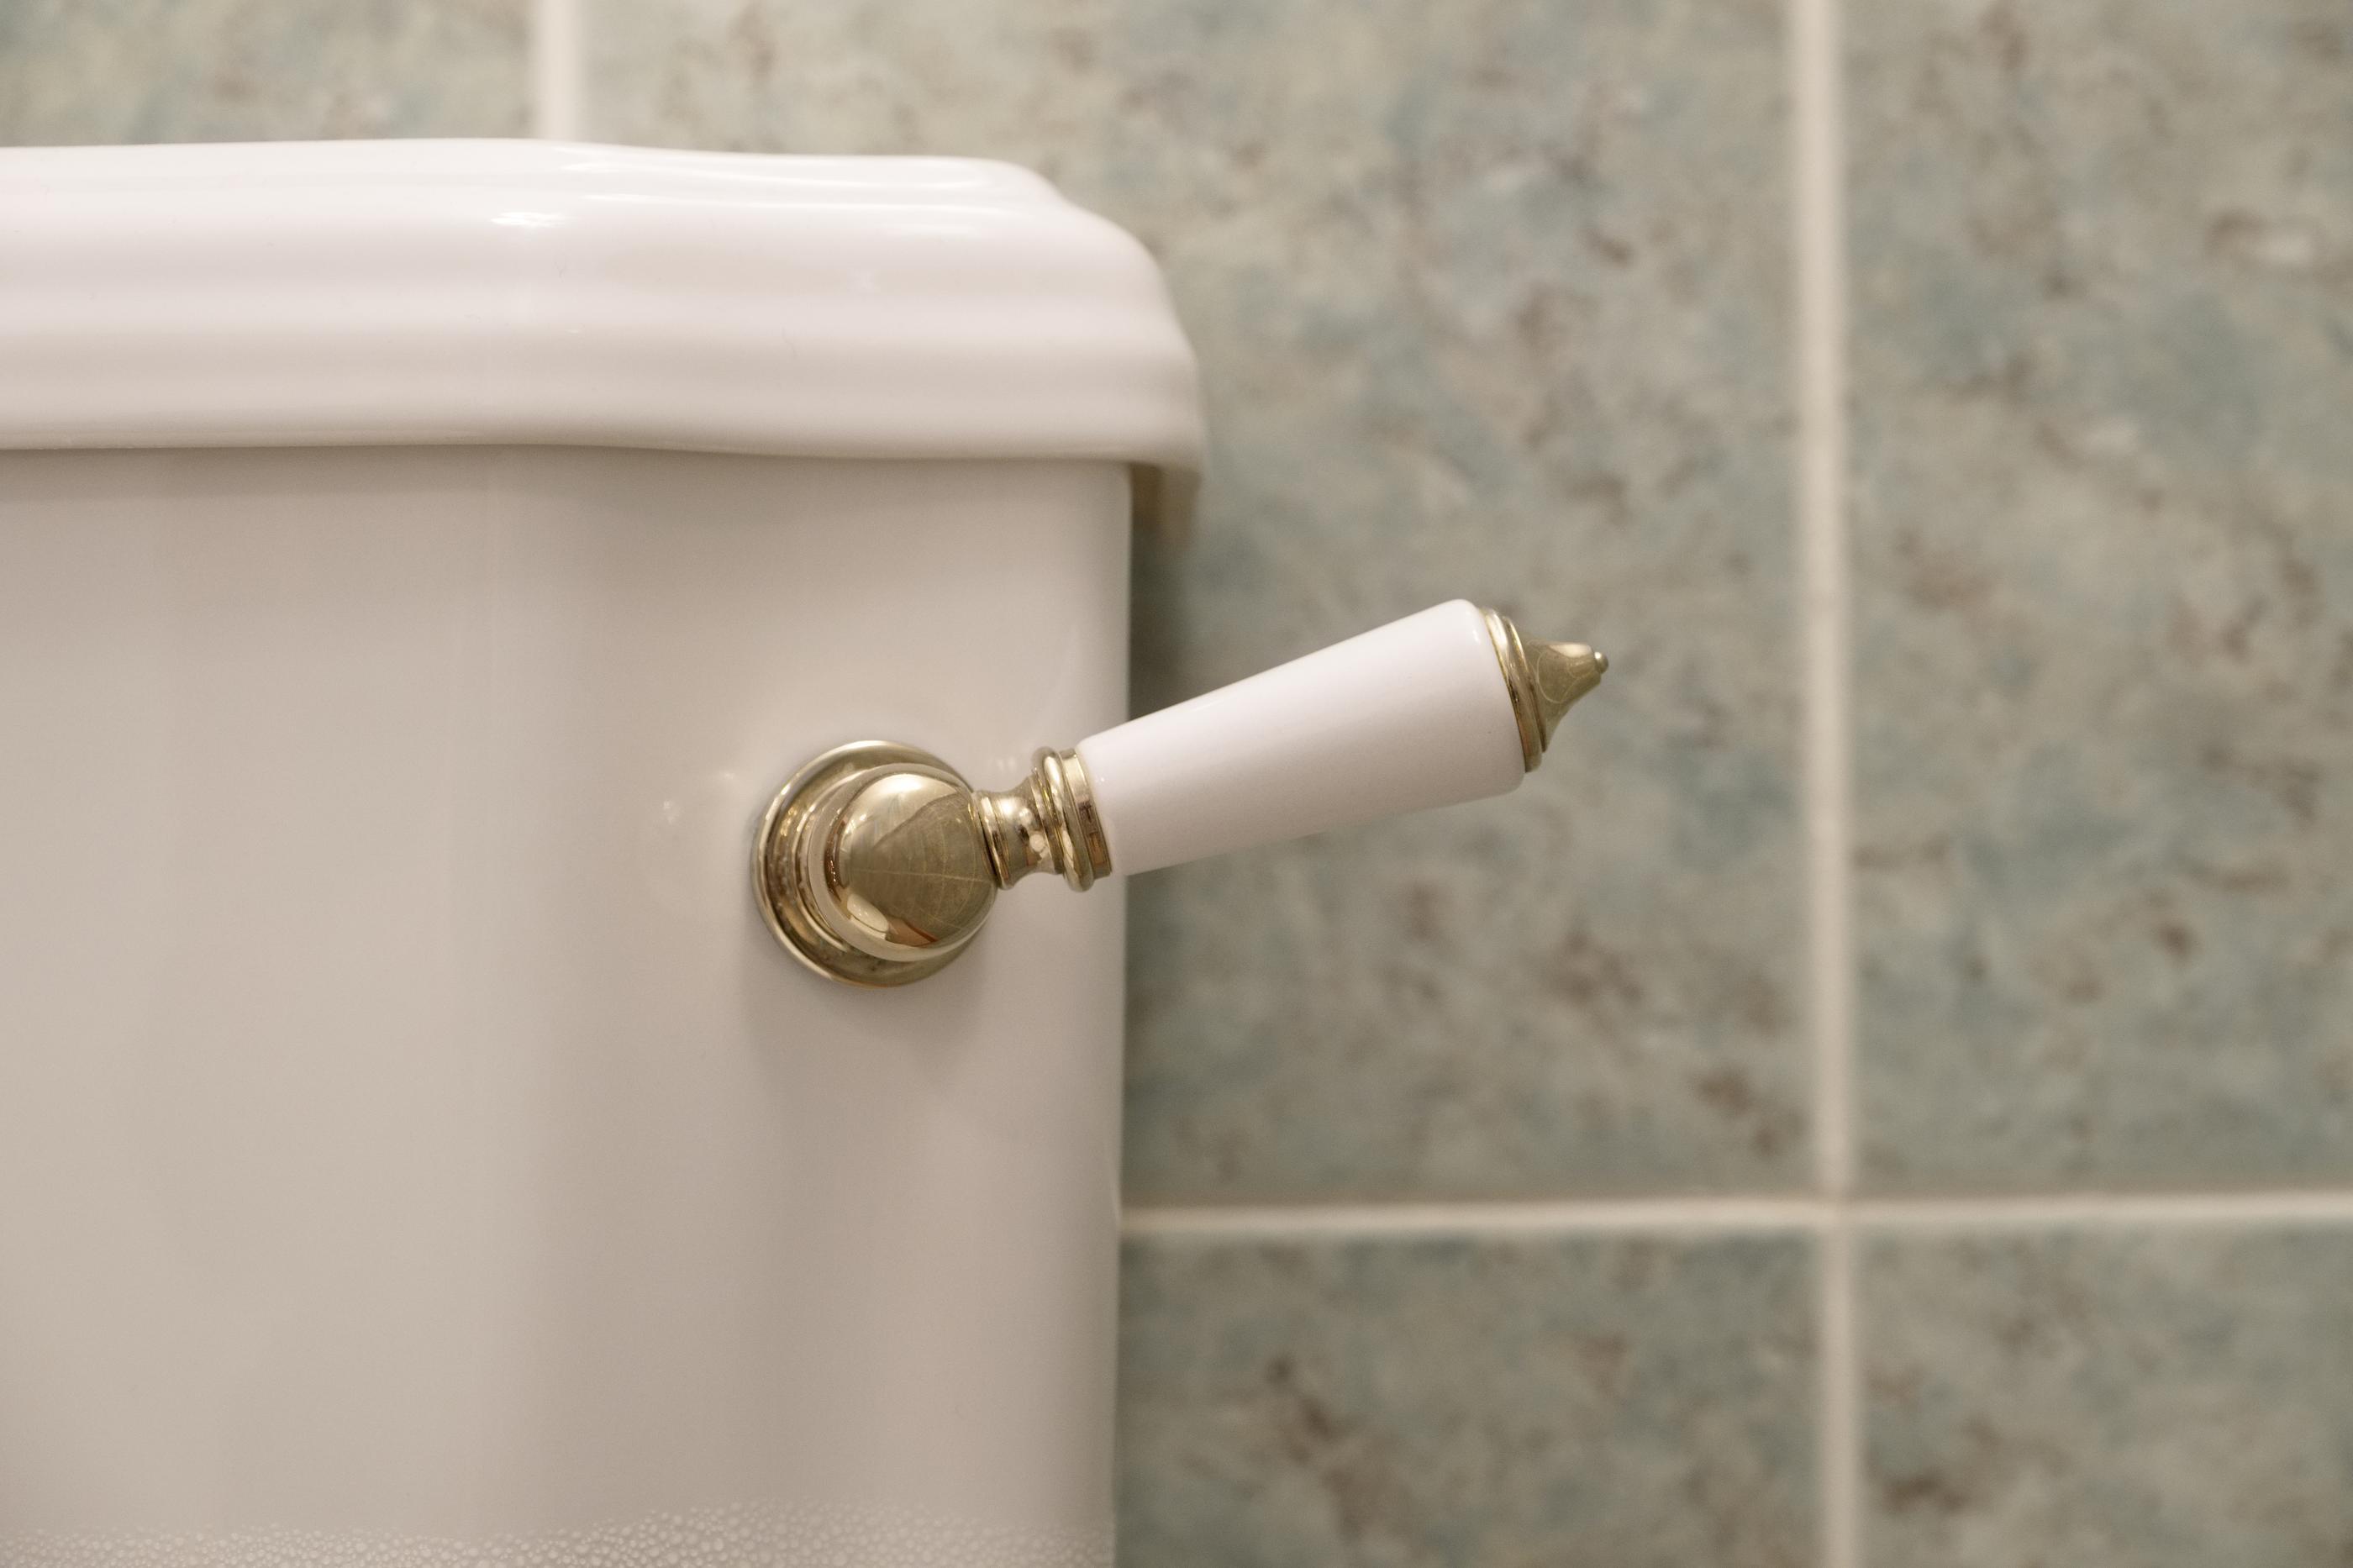 How to Remove an Old Toilet from Your Bathroom